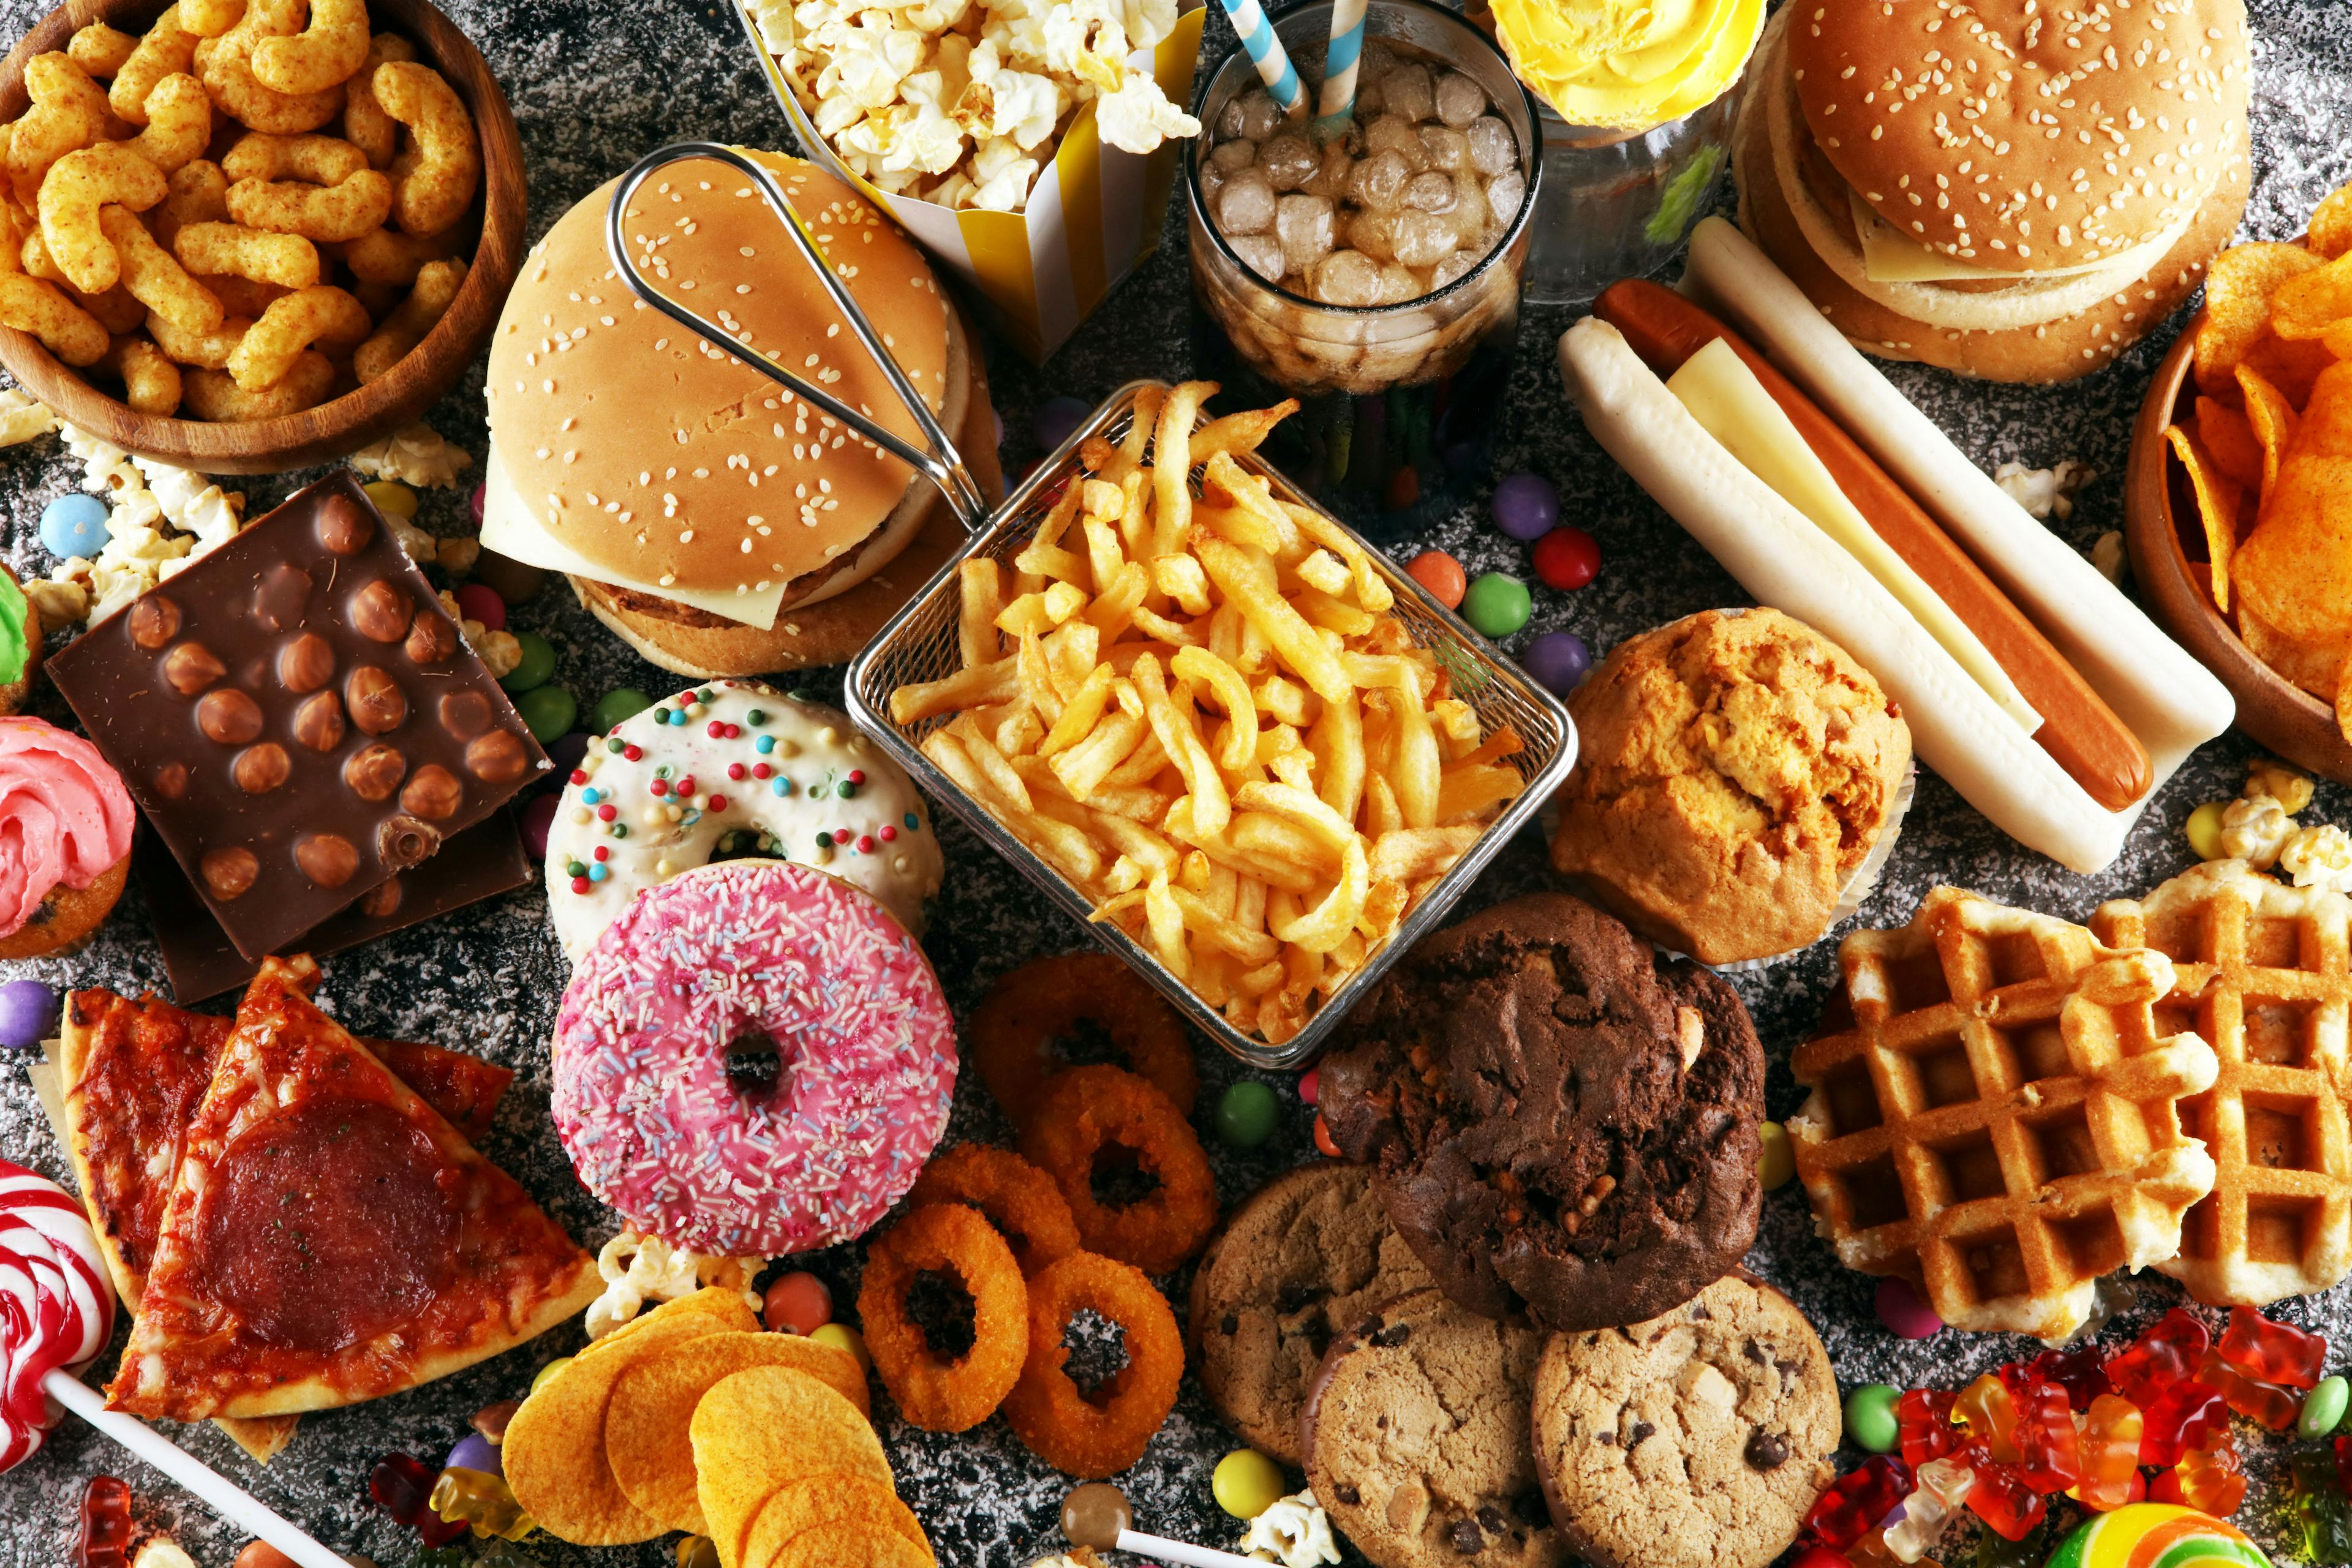 Unhealthy products. food bad for figure, skin, heart and teeth. | Image Credit: © beats_ - stock.adobe.com